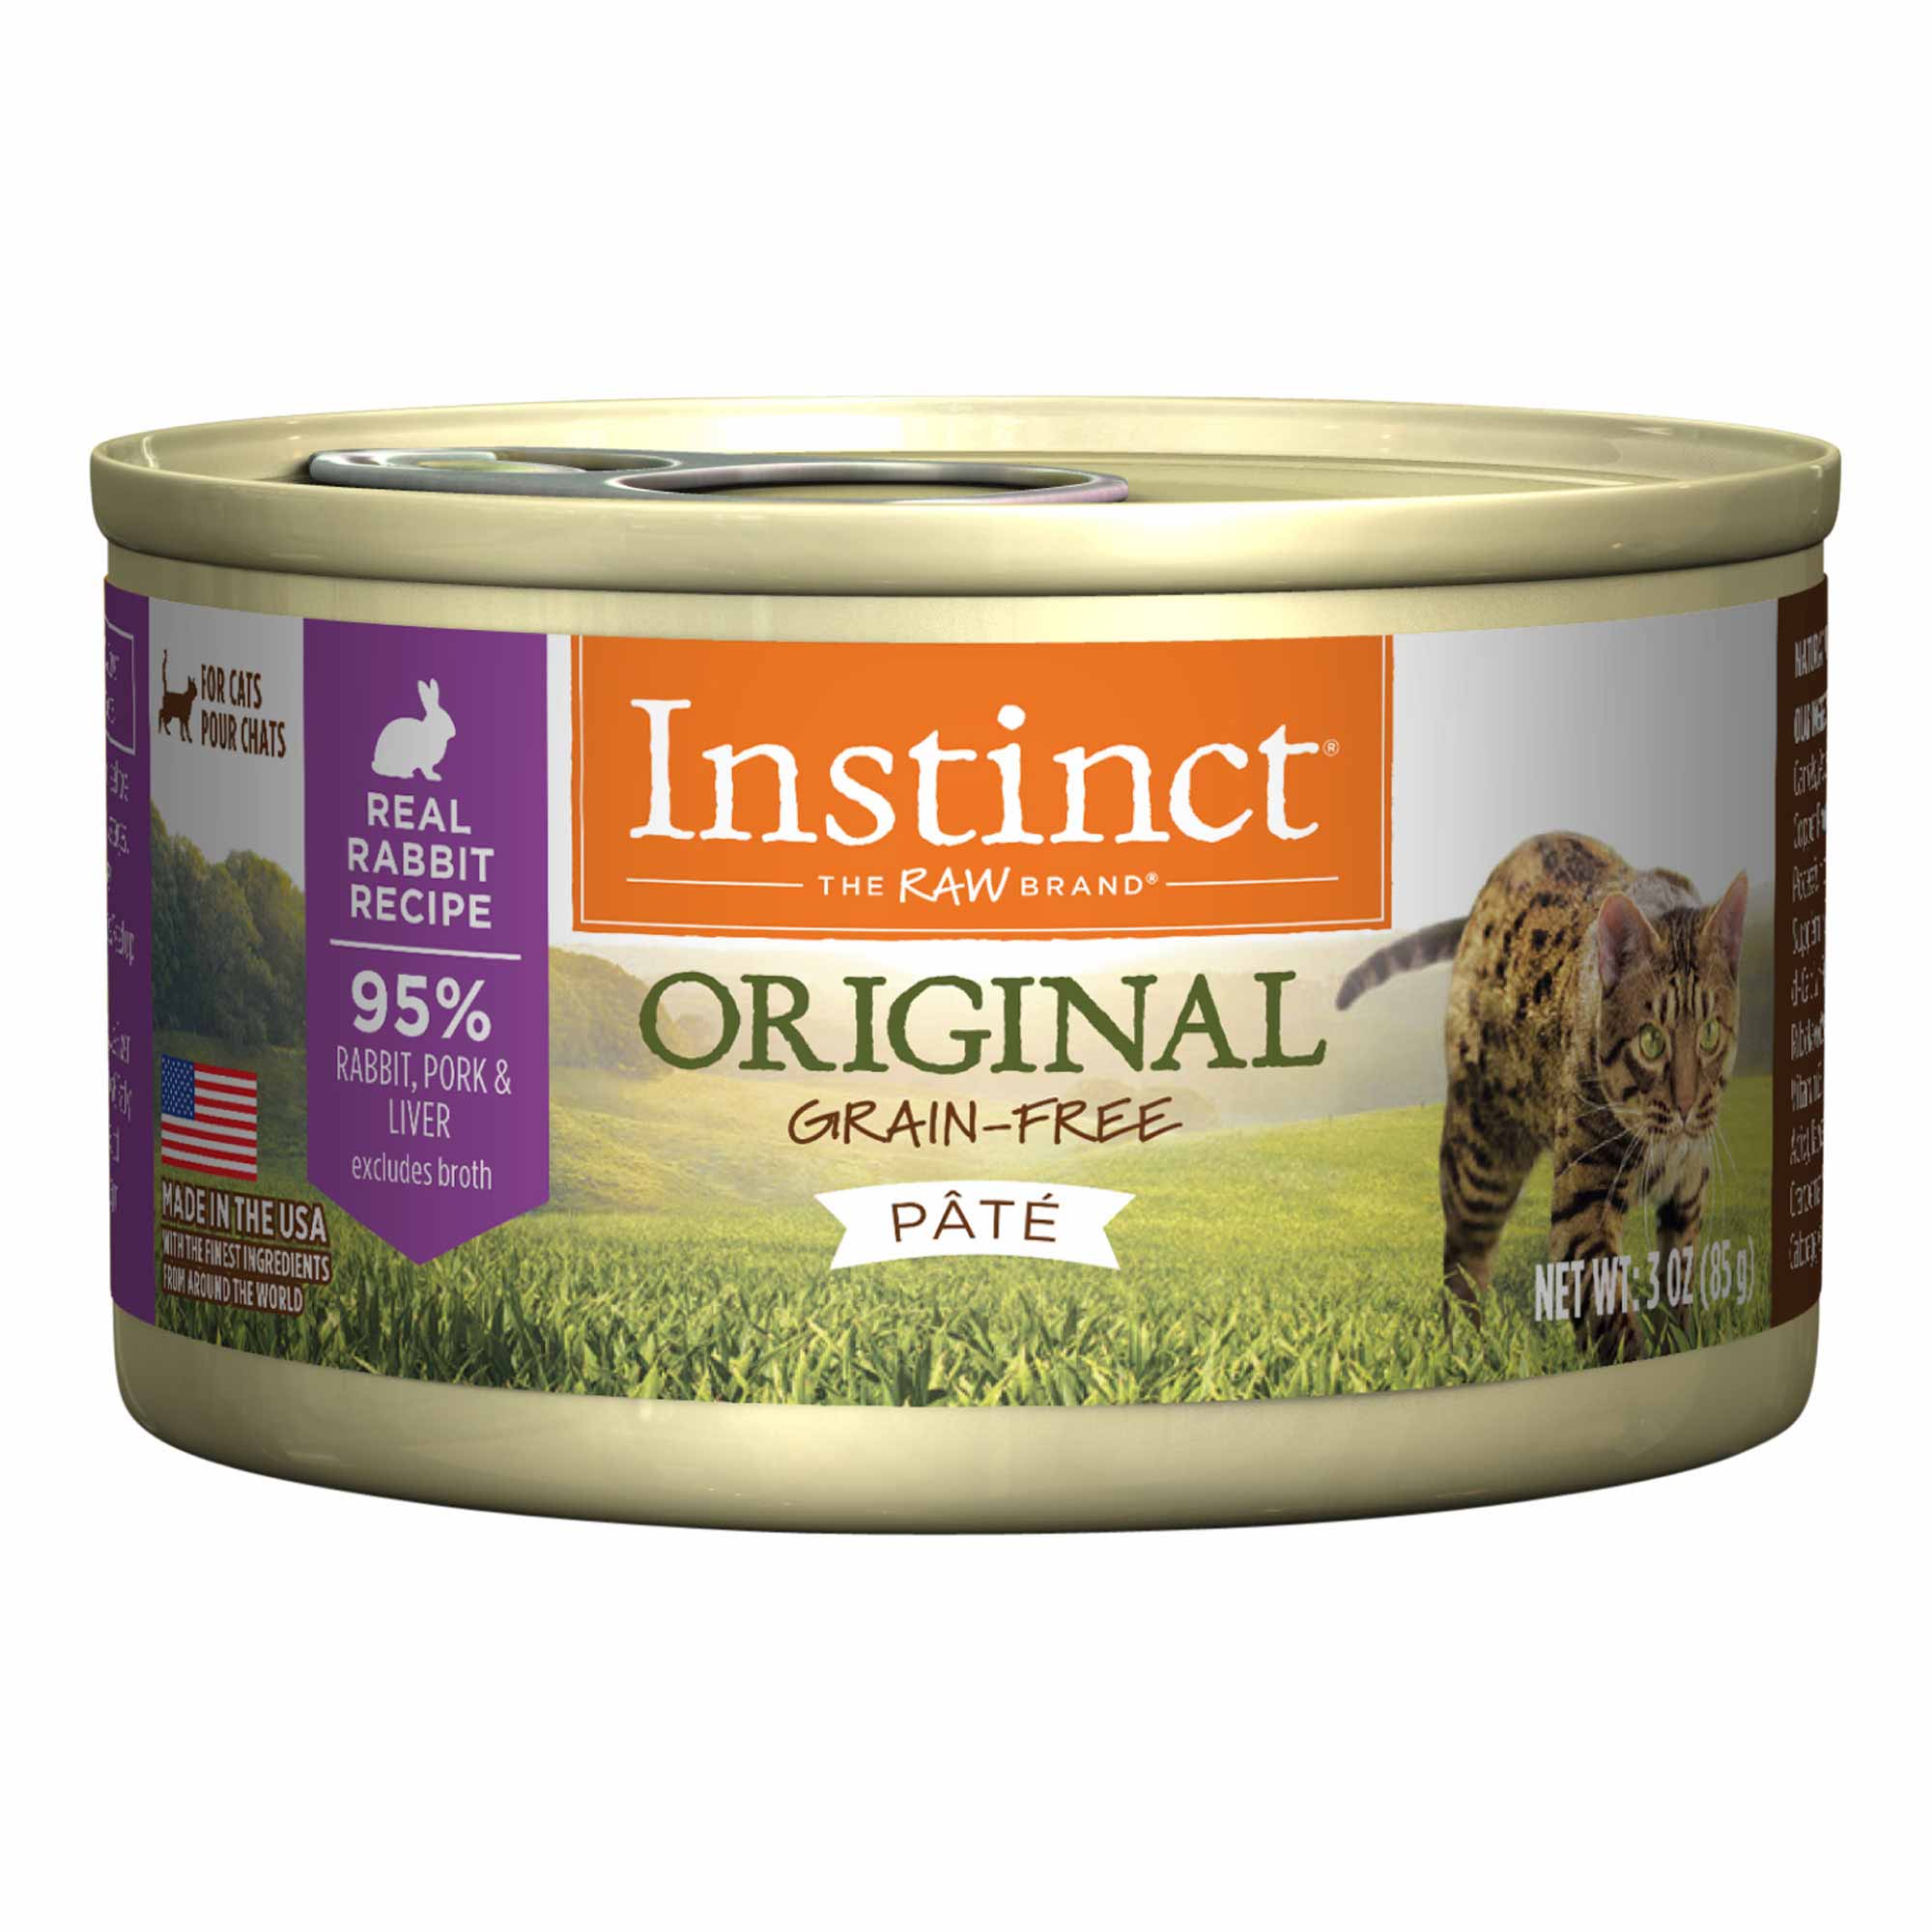 Instinct Original Grain-Free Pate Real Rabbit Recipe Canned Cat Food, 3 Ounce Can